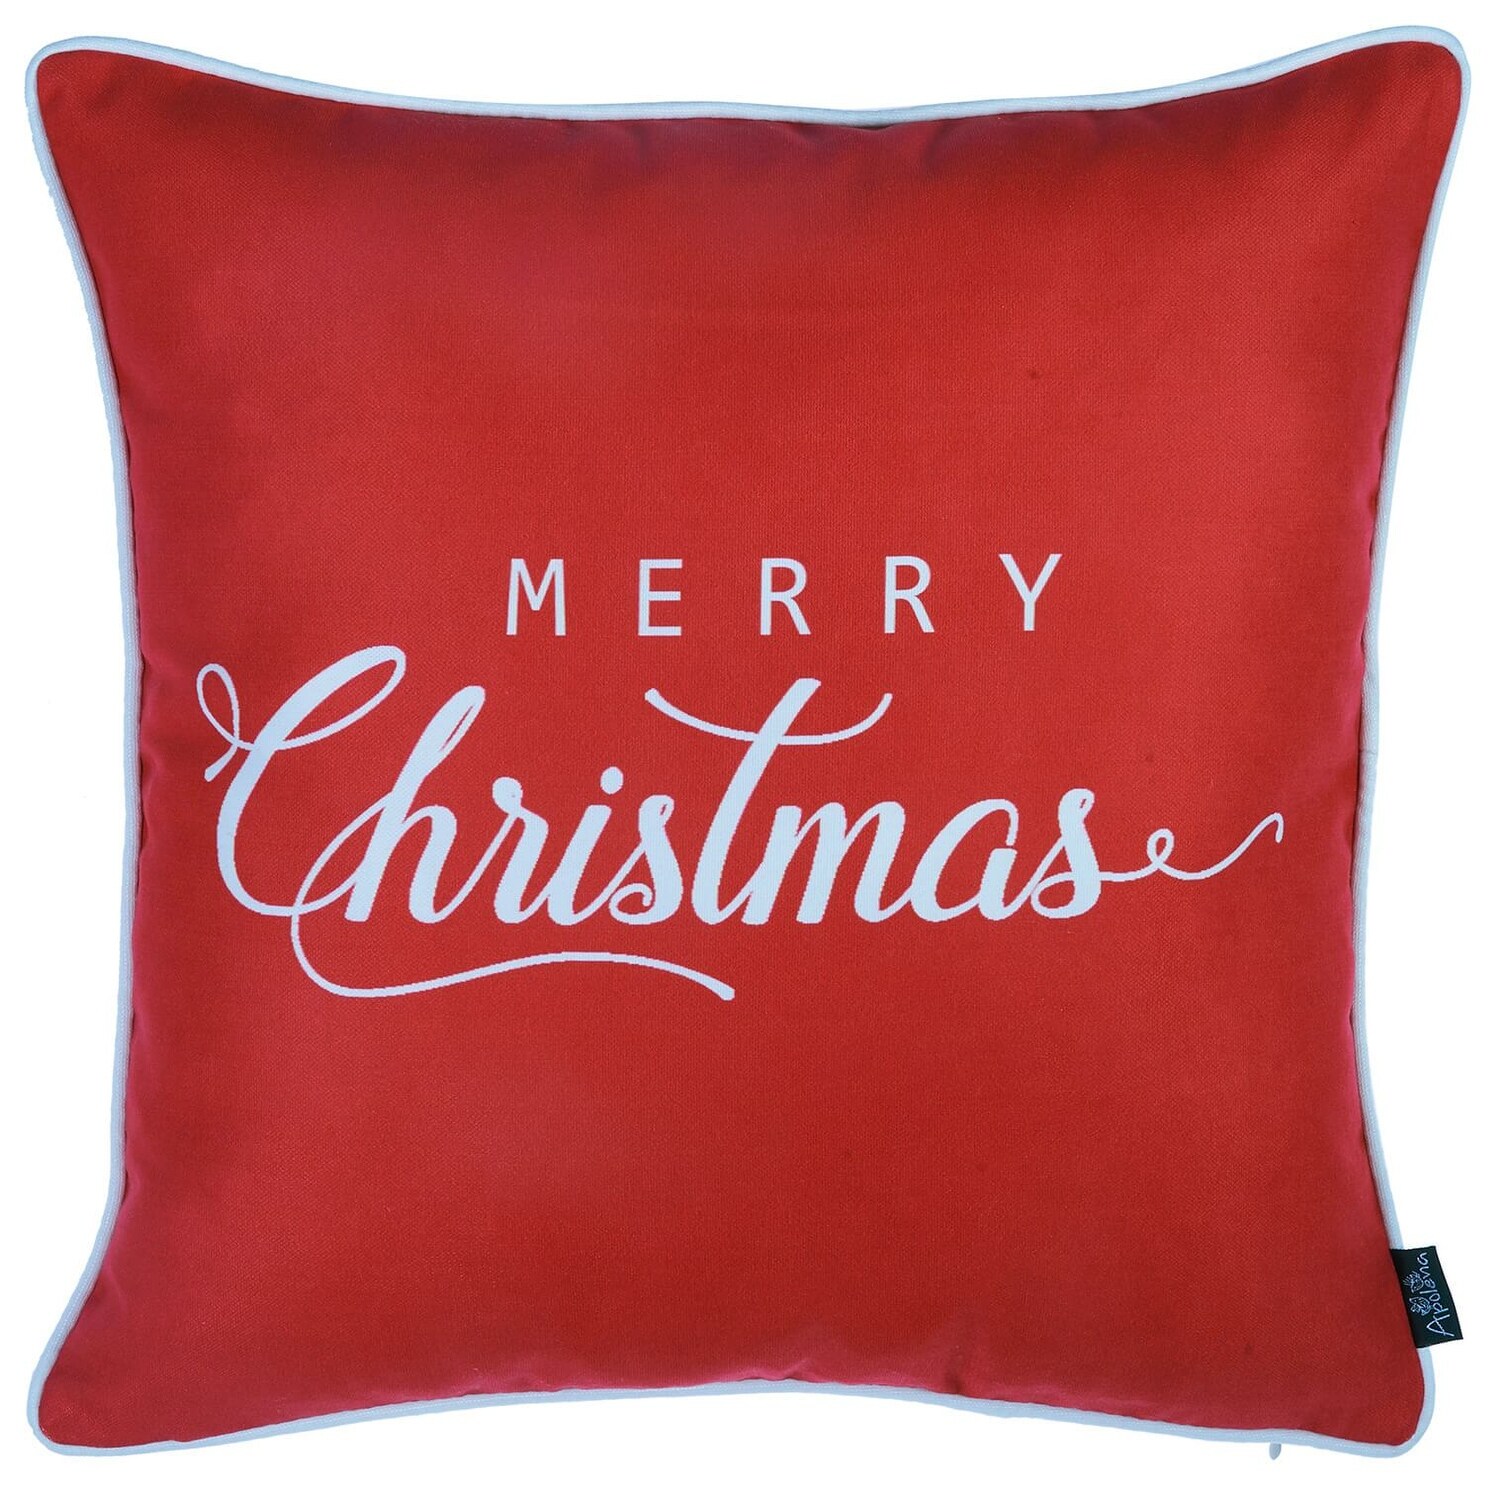 https://ak1.ostkcdn.com/images/products/is/images/direct/c69496624fbafebd42092abe47219de3386b7b17/Merry-Christmas-Set-of-4-Throw-Pillow-Covers-Christmas-Gift-18%22x18%22.jpg